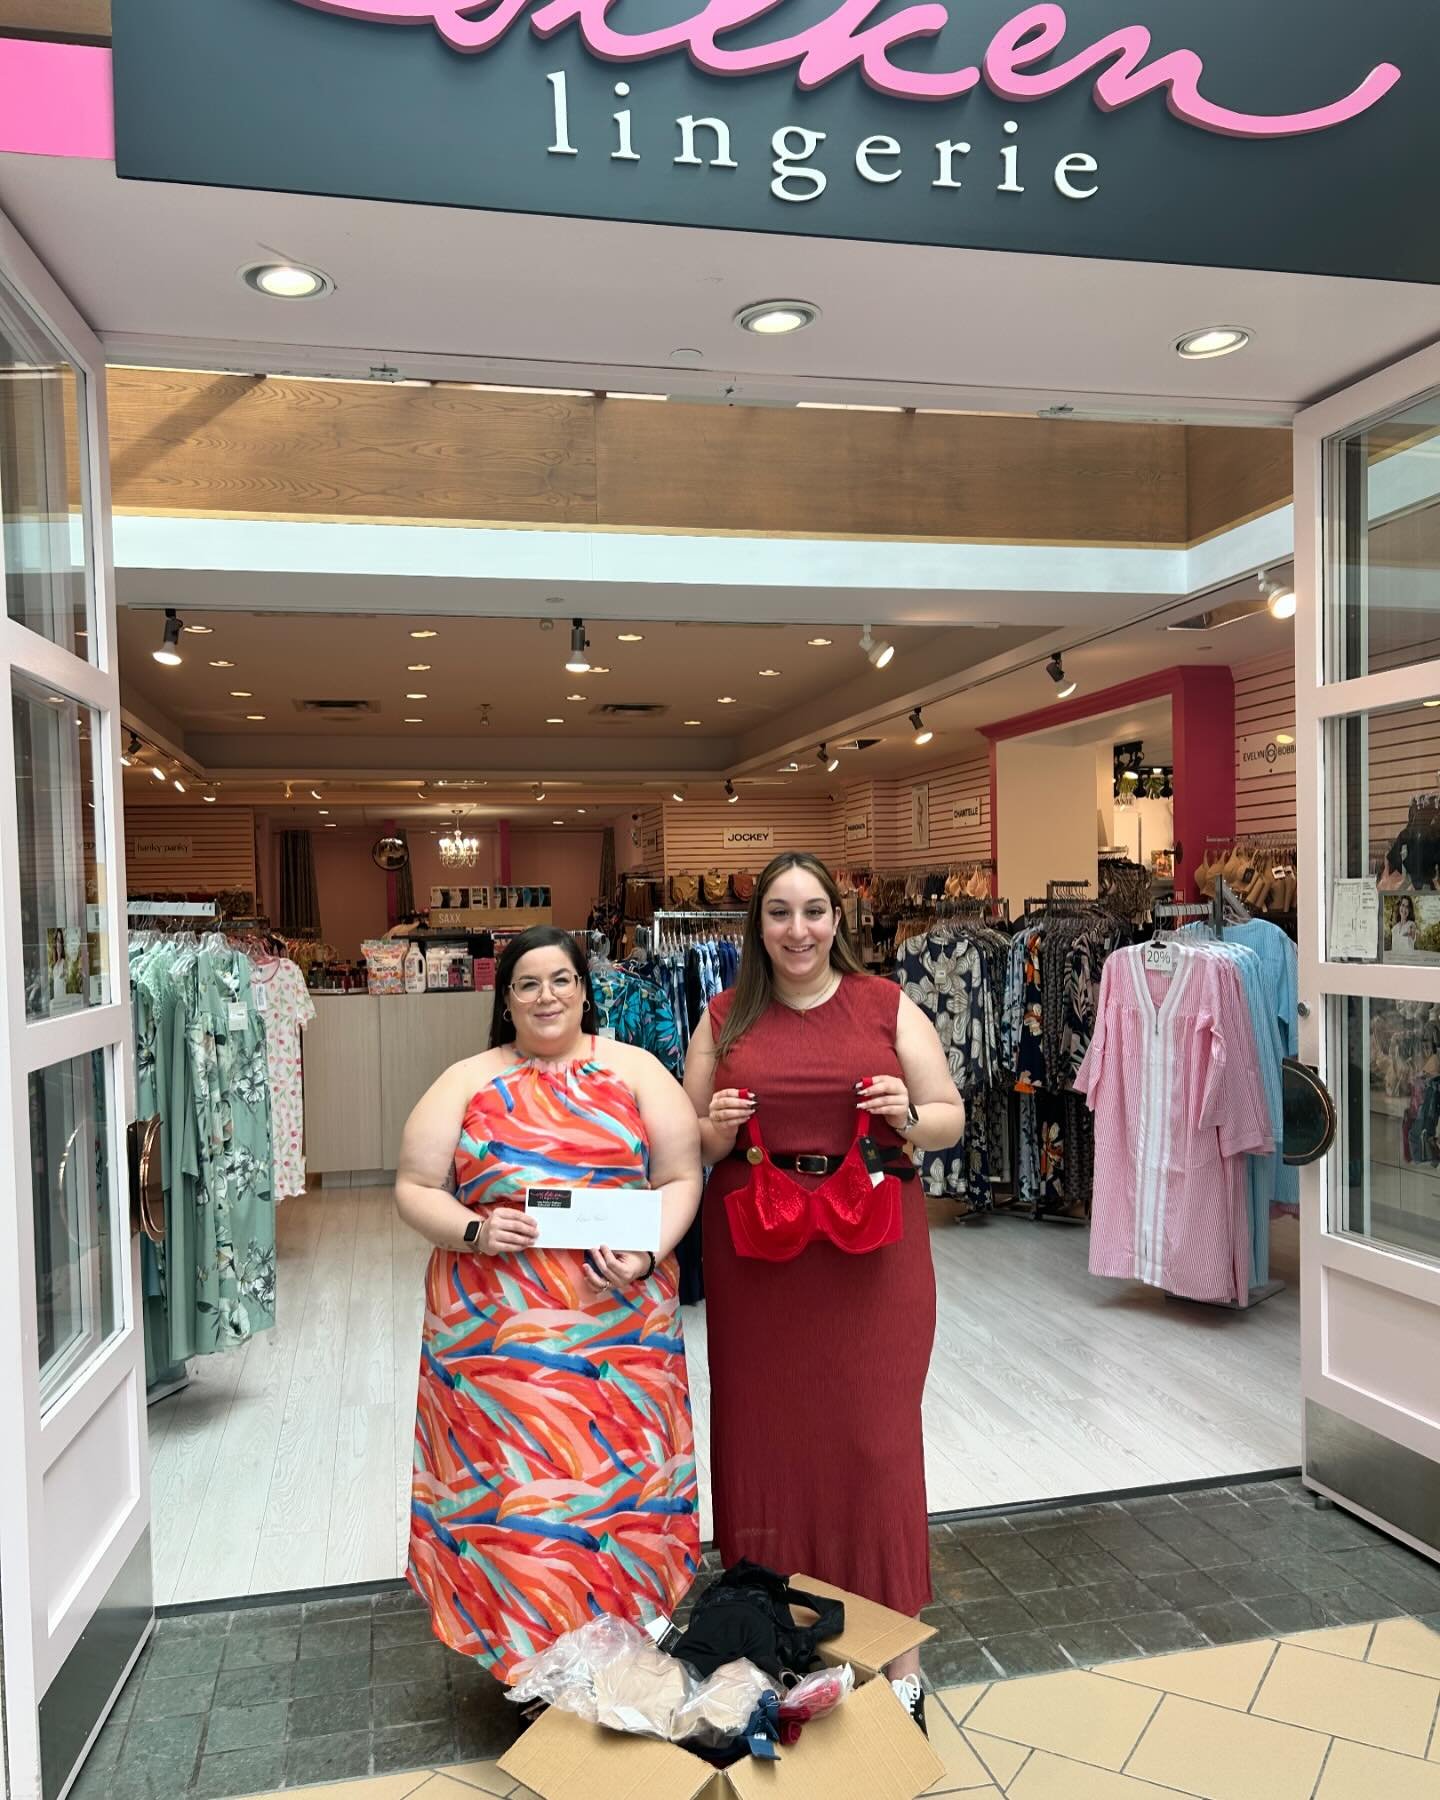 Long time supporters at @silkenlingerie donating $500 and a box of gorgeous lingerie for clients in need.  Thank you for your continued generousity @wacoalamerica #womensupportingwomen #mothersday